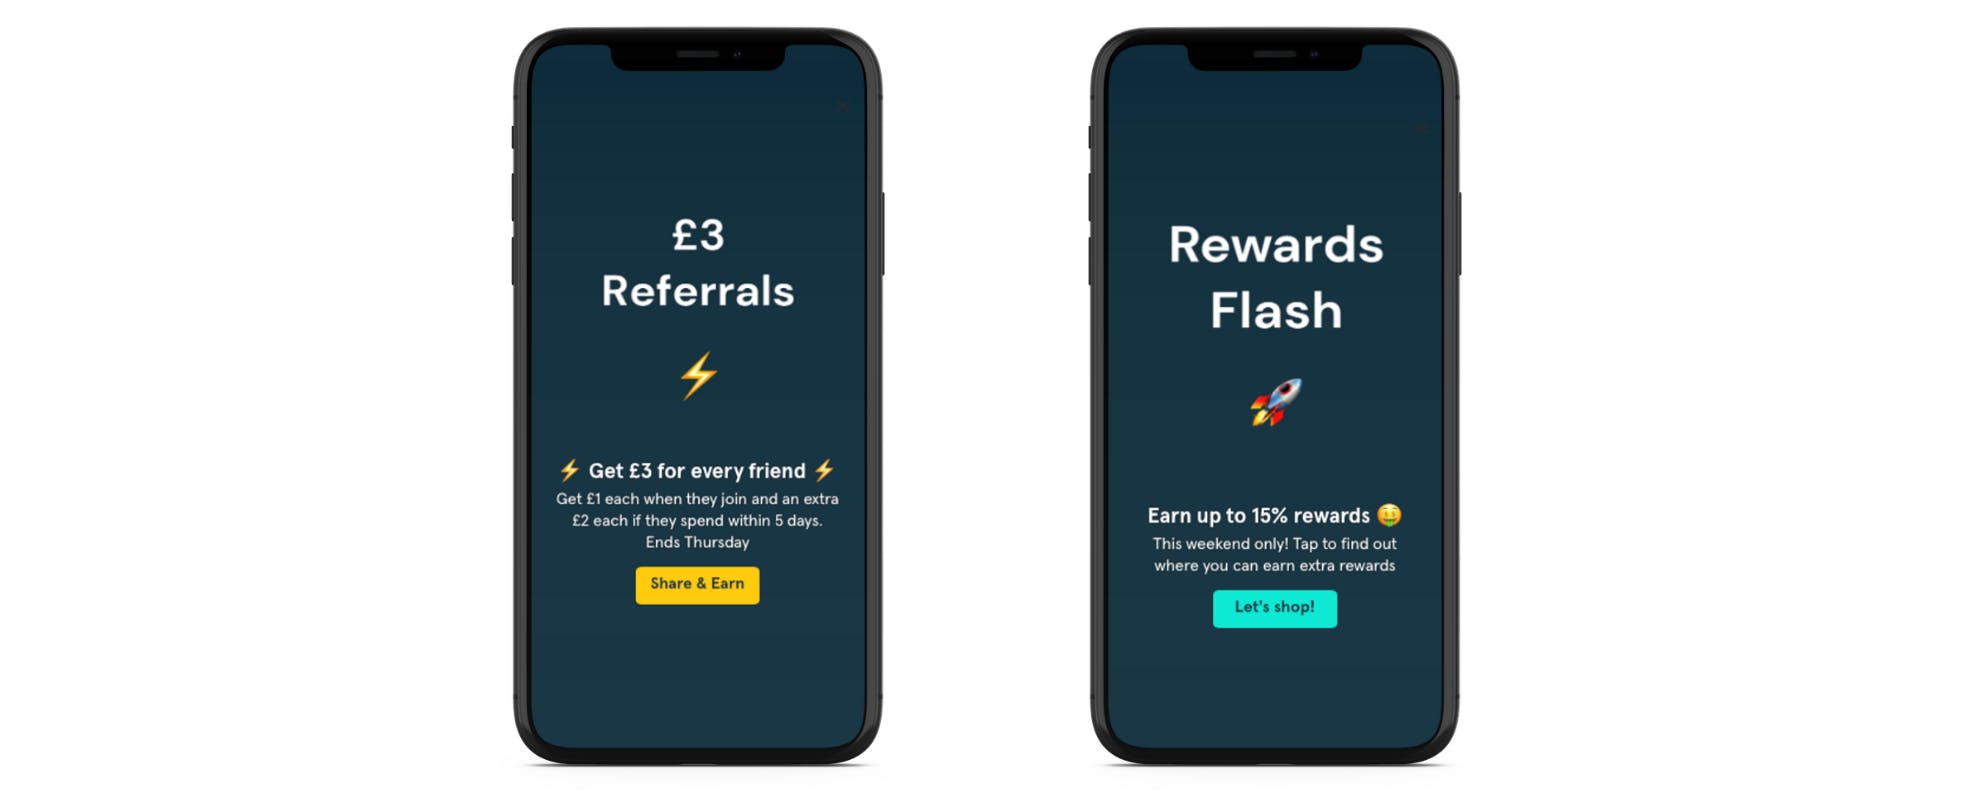 Airtime Surge and Rewards Flash